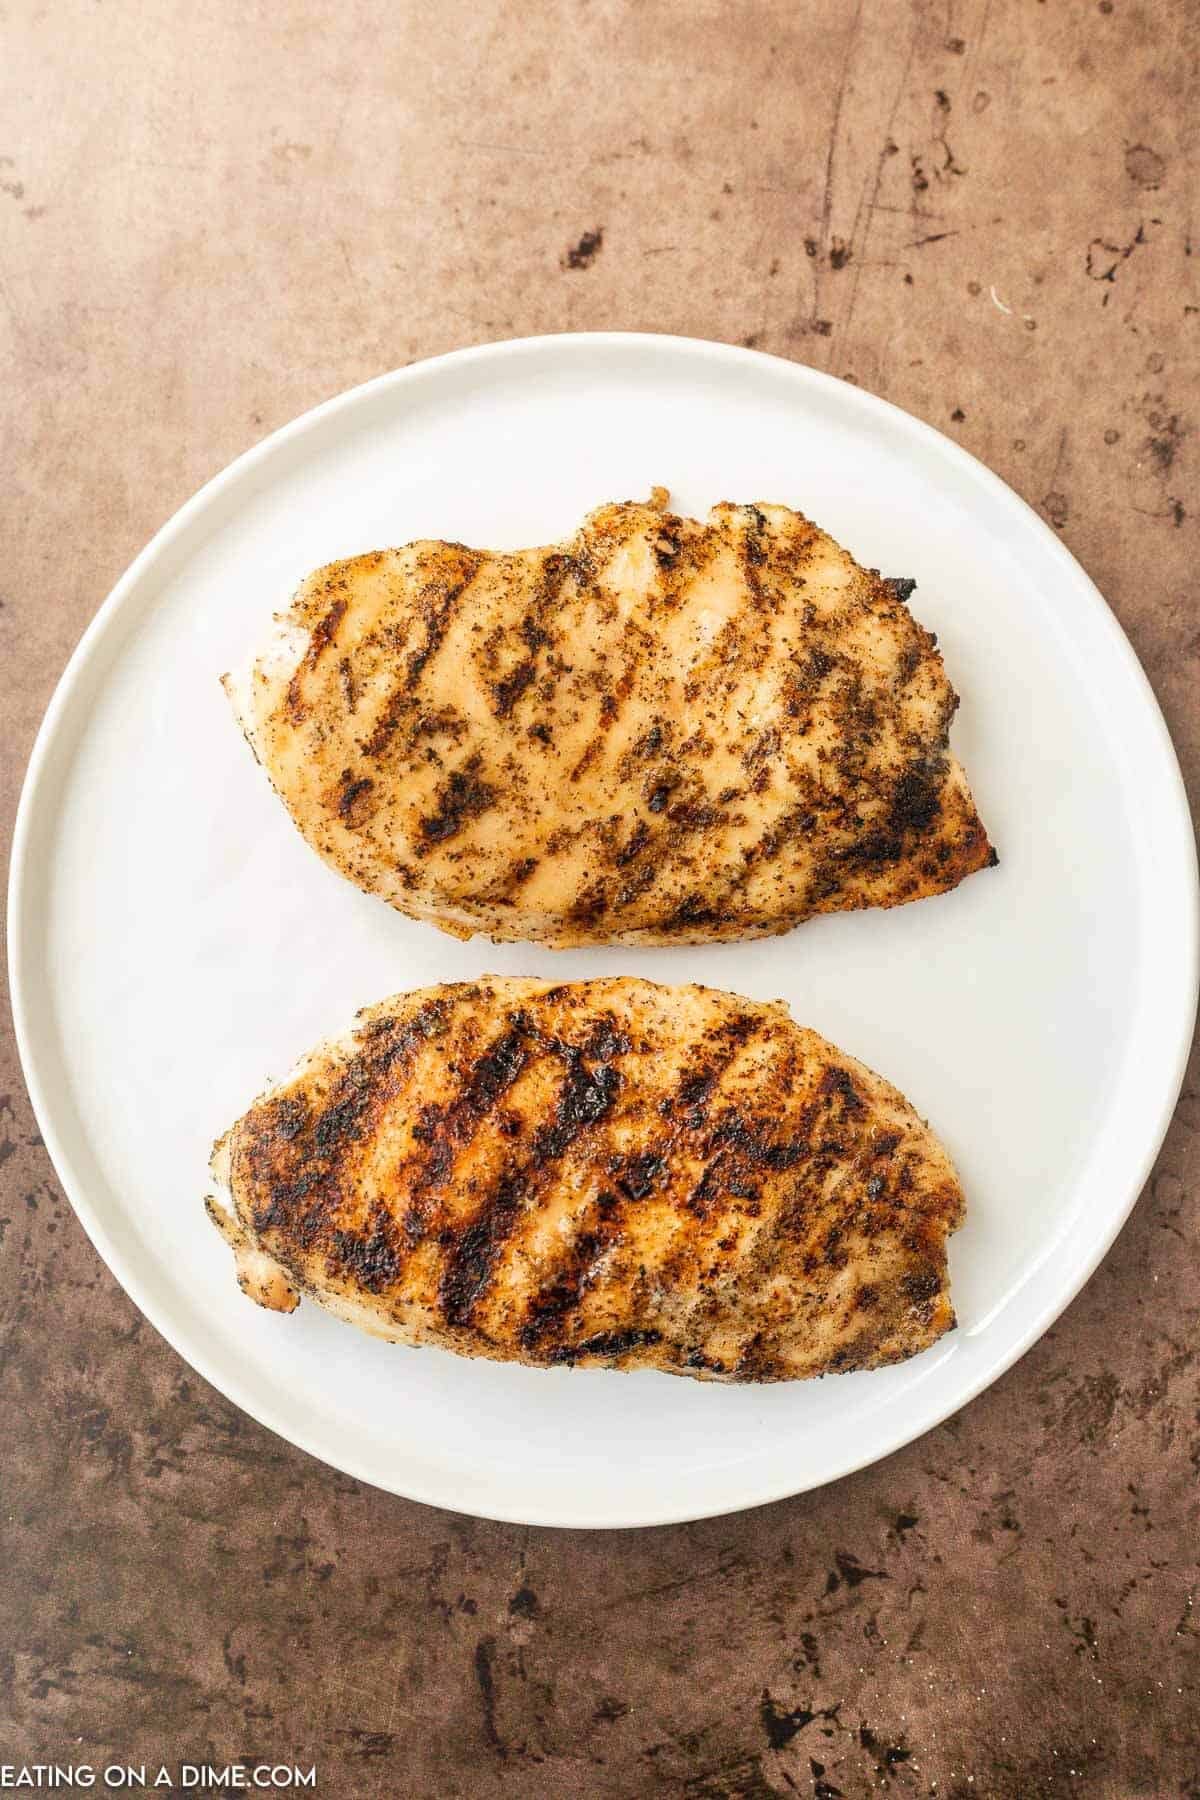 Grilled chicken on a plate